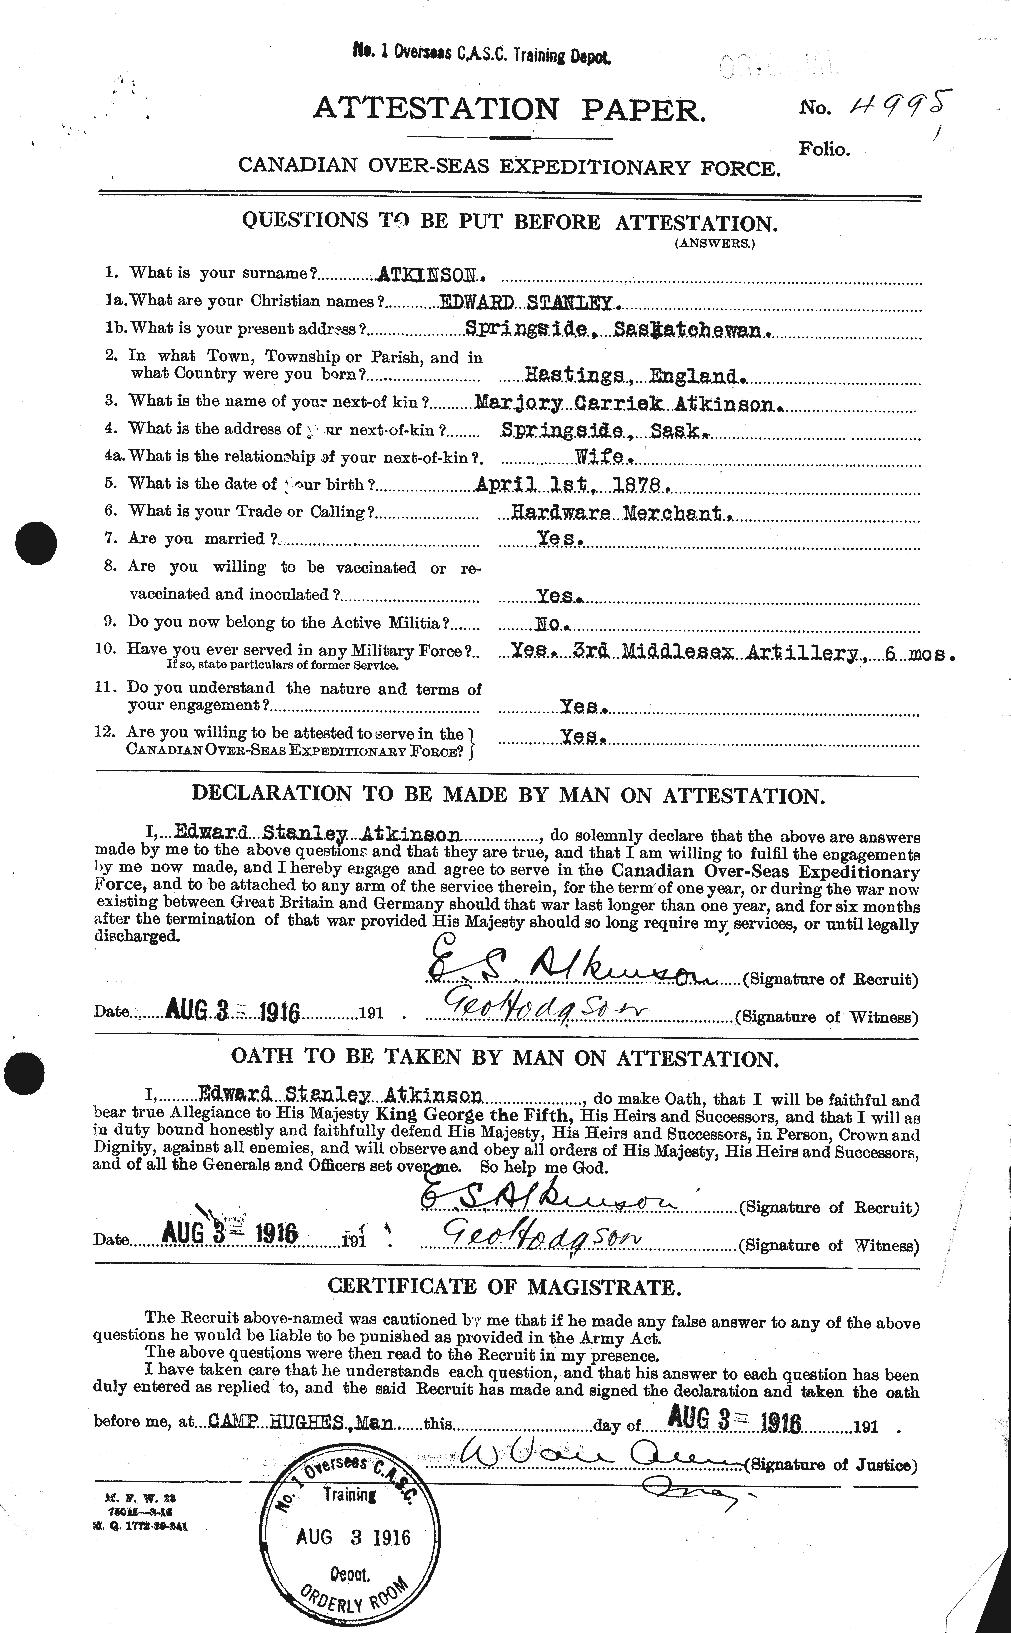 Personnel Records of the First World War - CEF 217491a